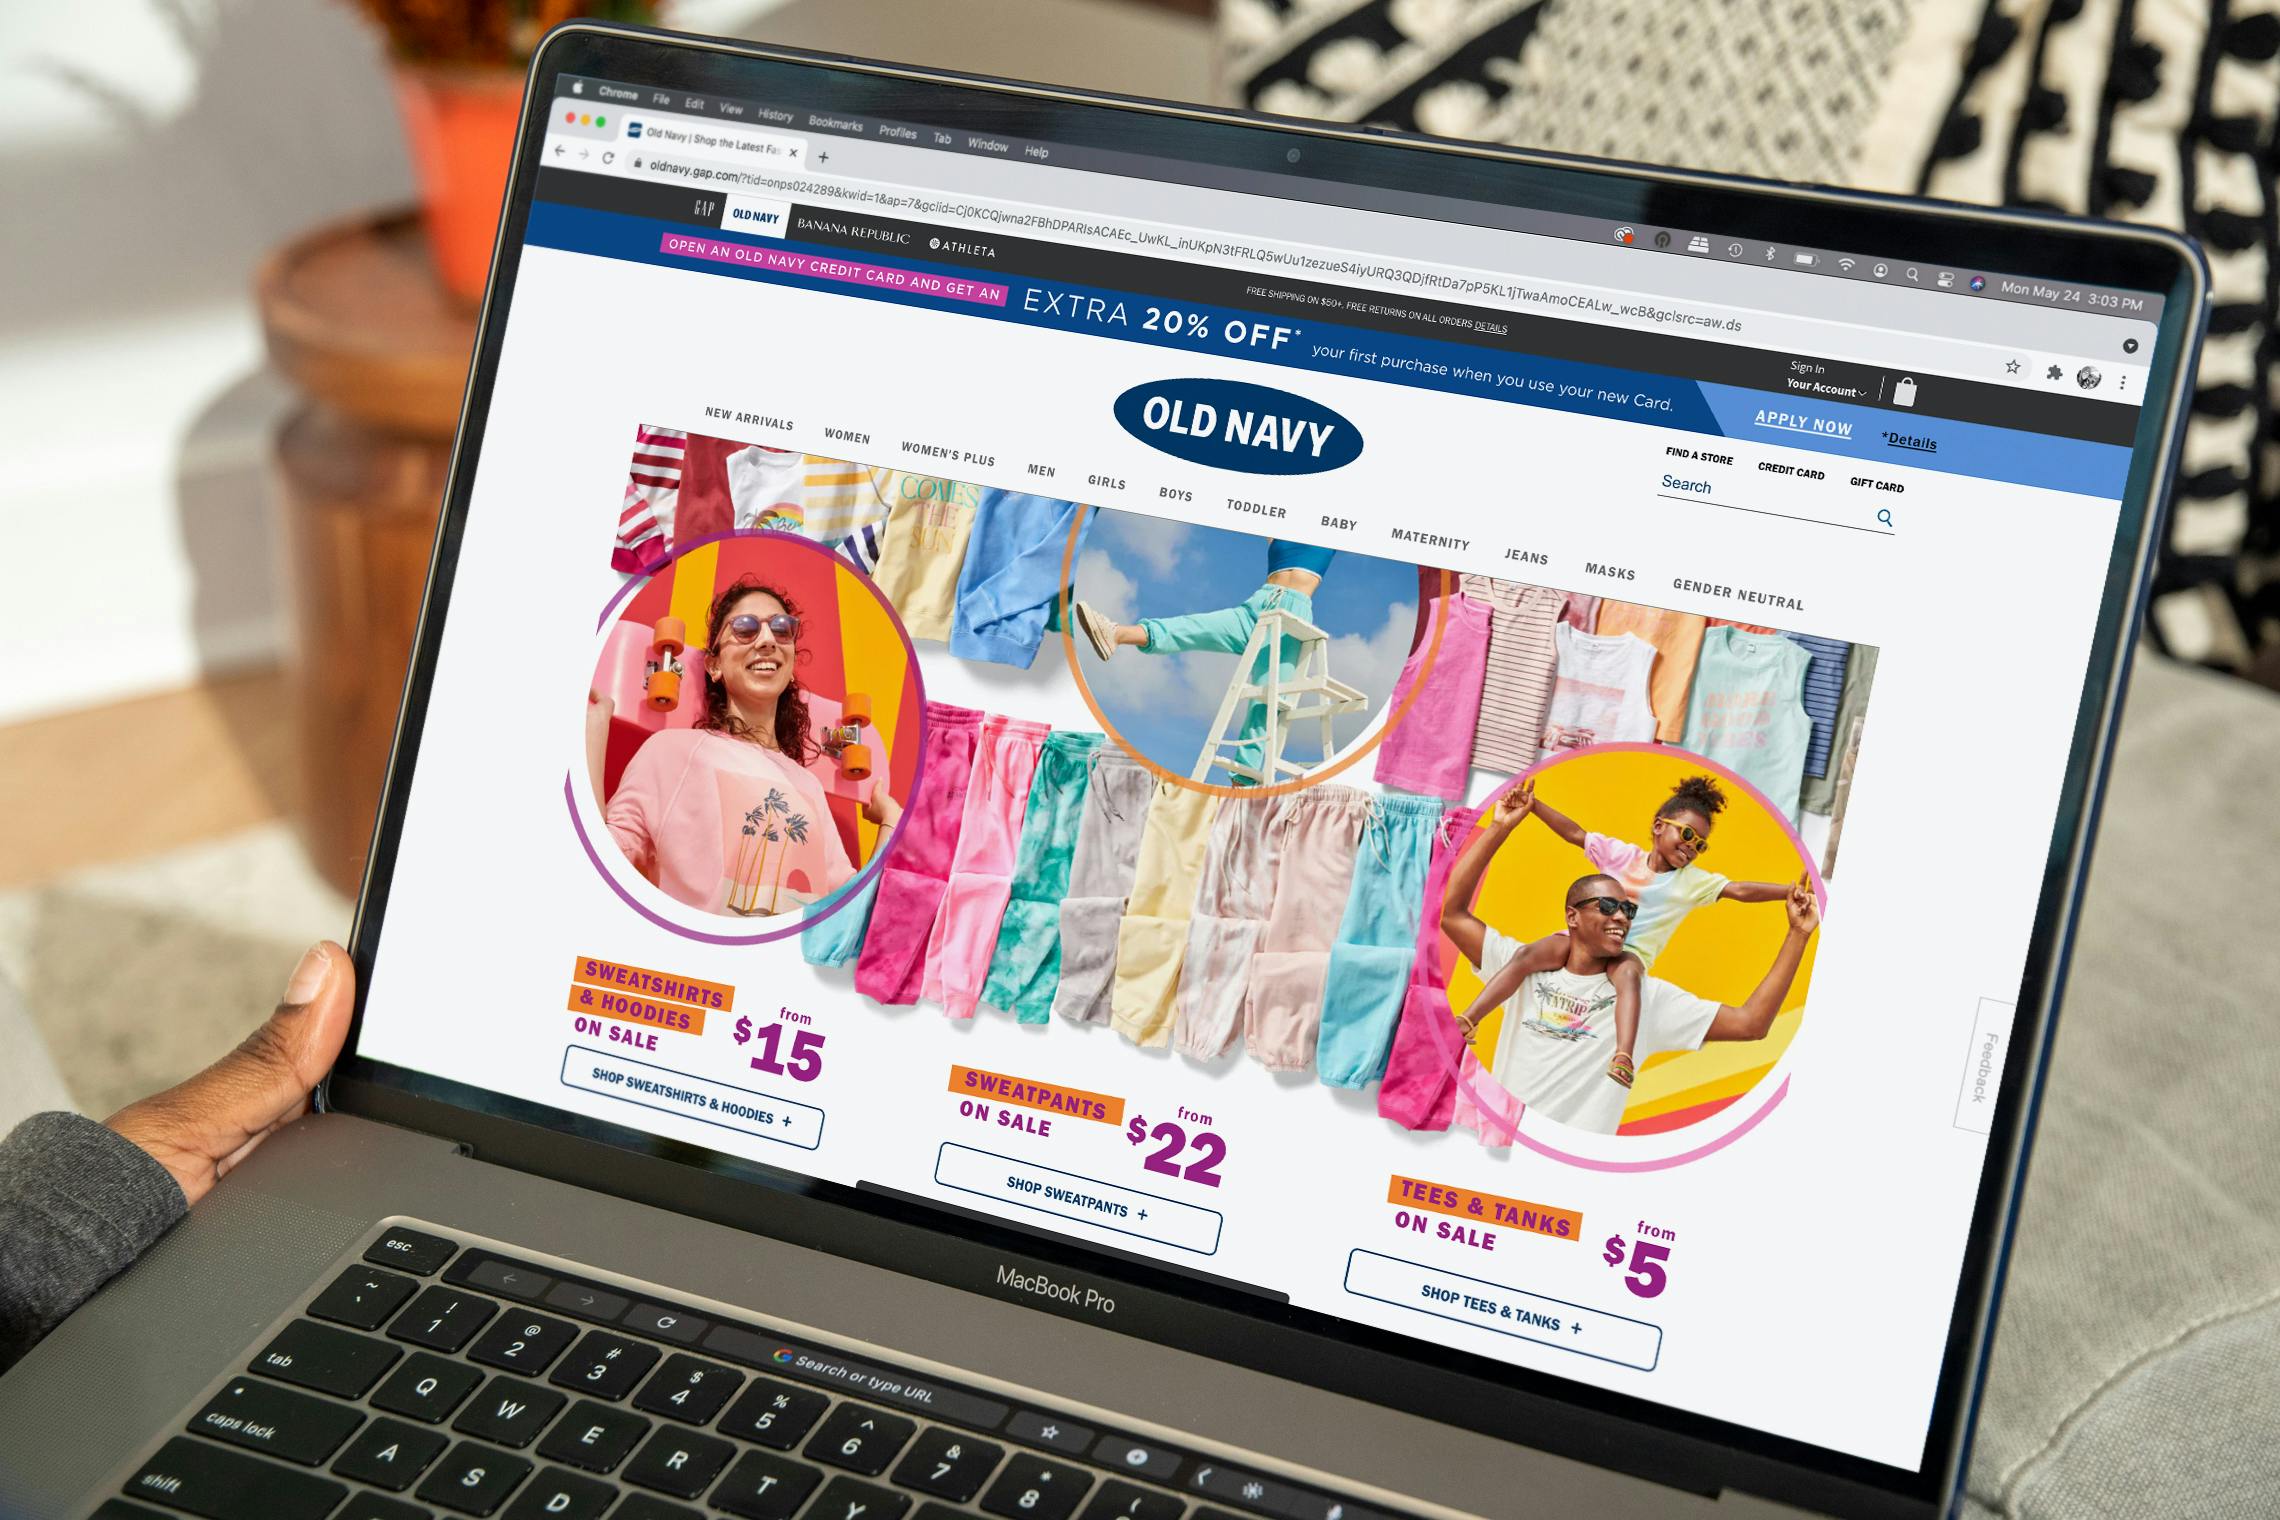 The Old Navy website homepage displayed on an open laptop sitting on a table.